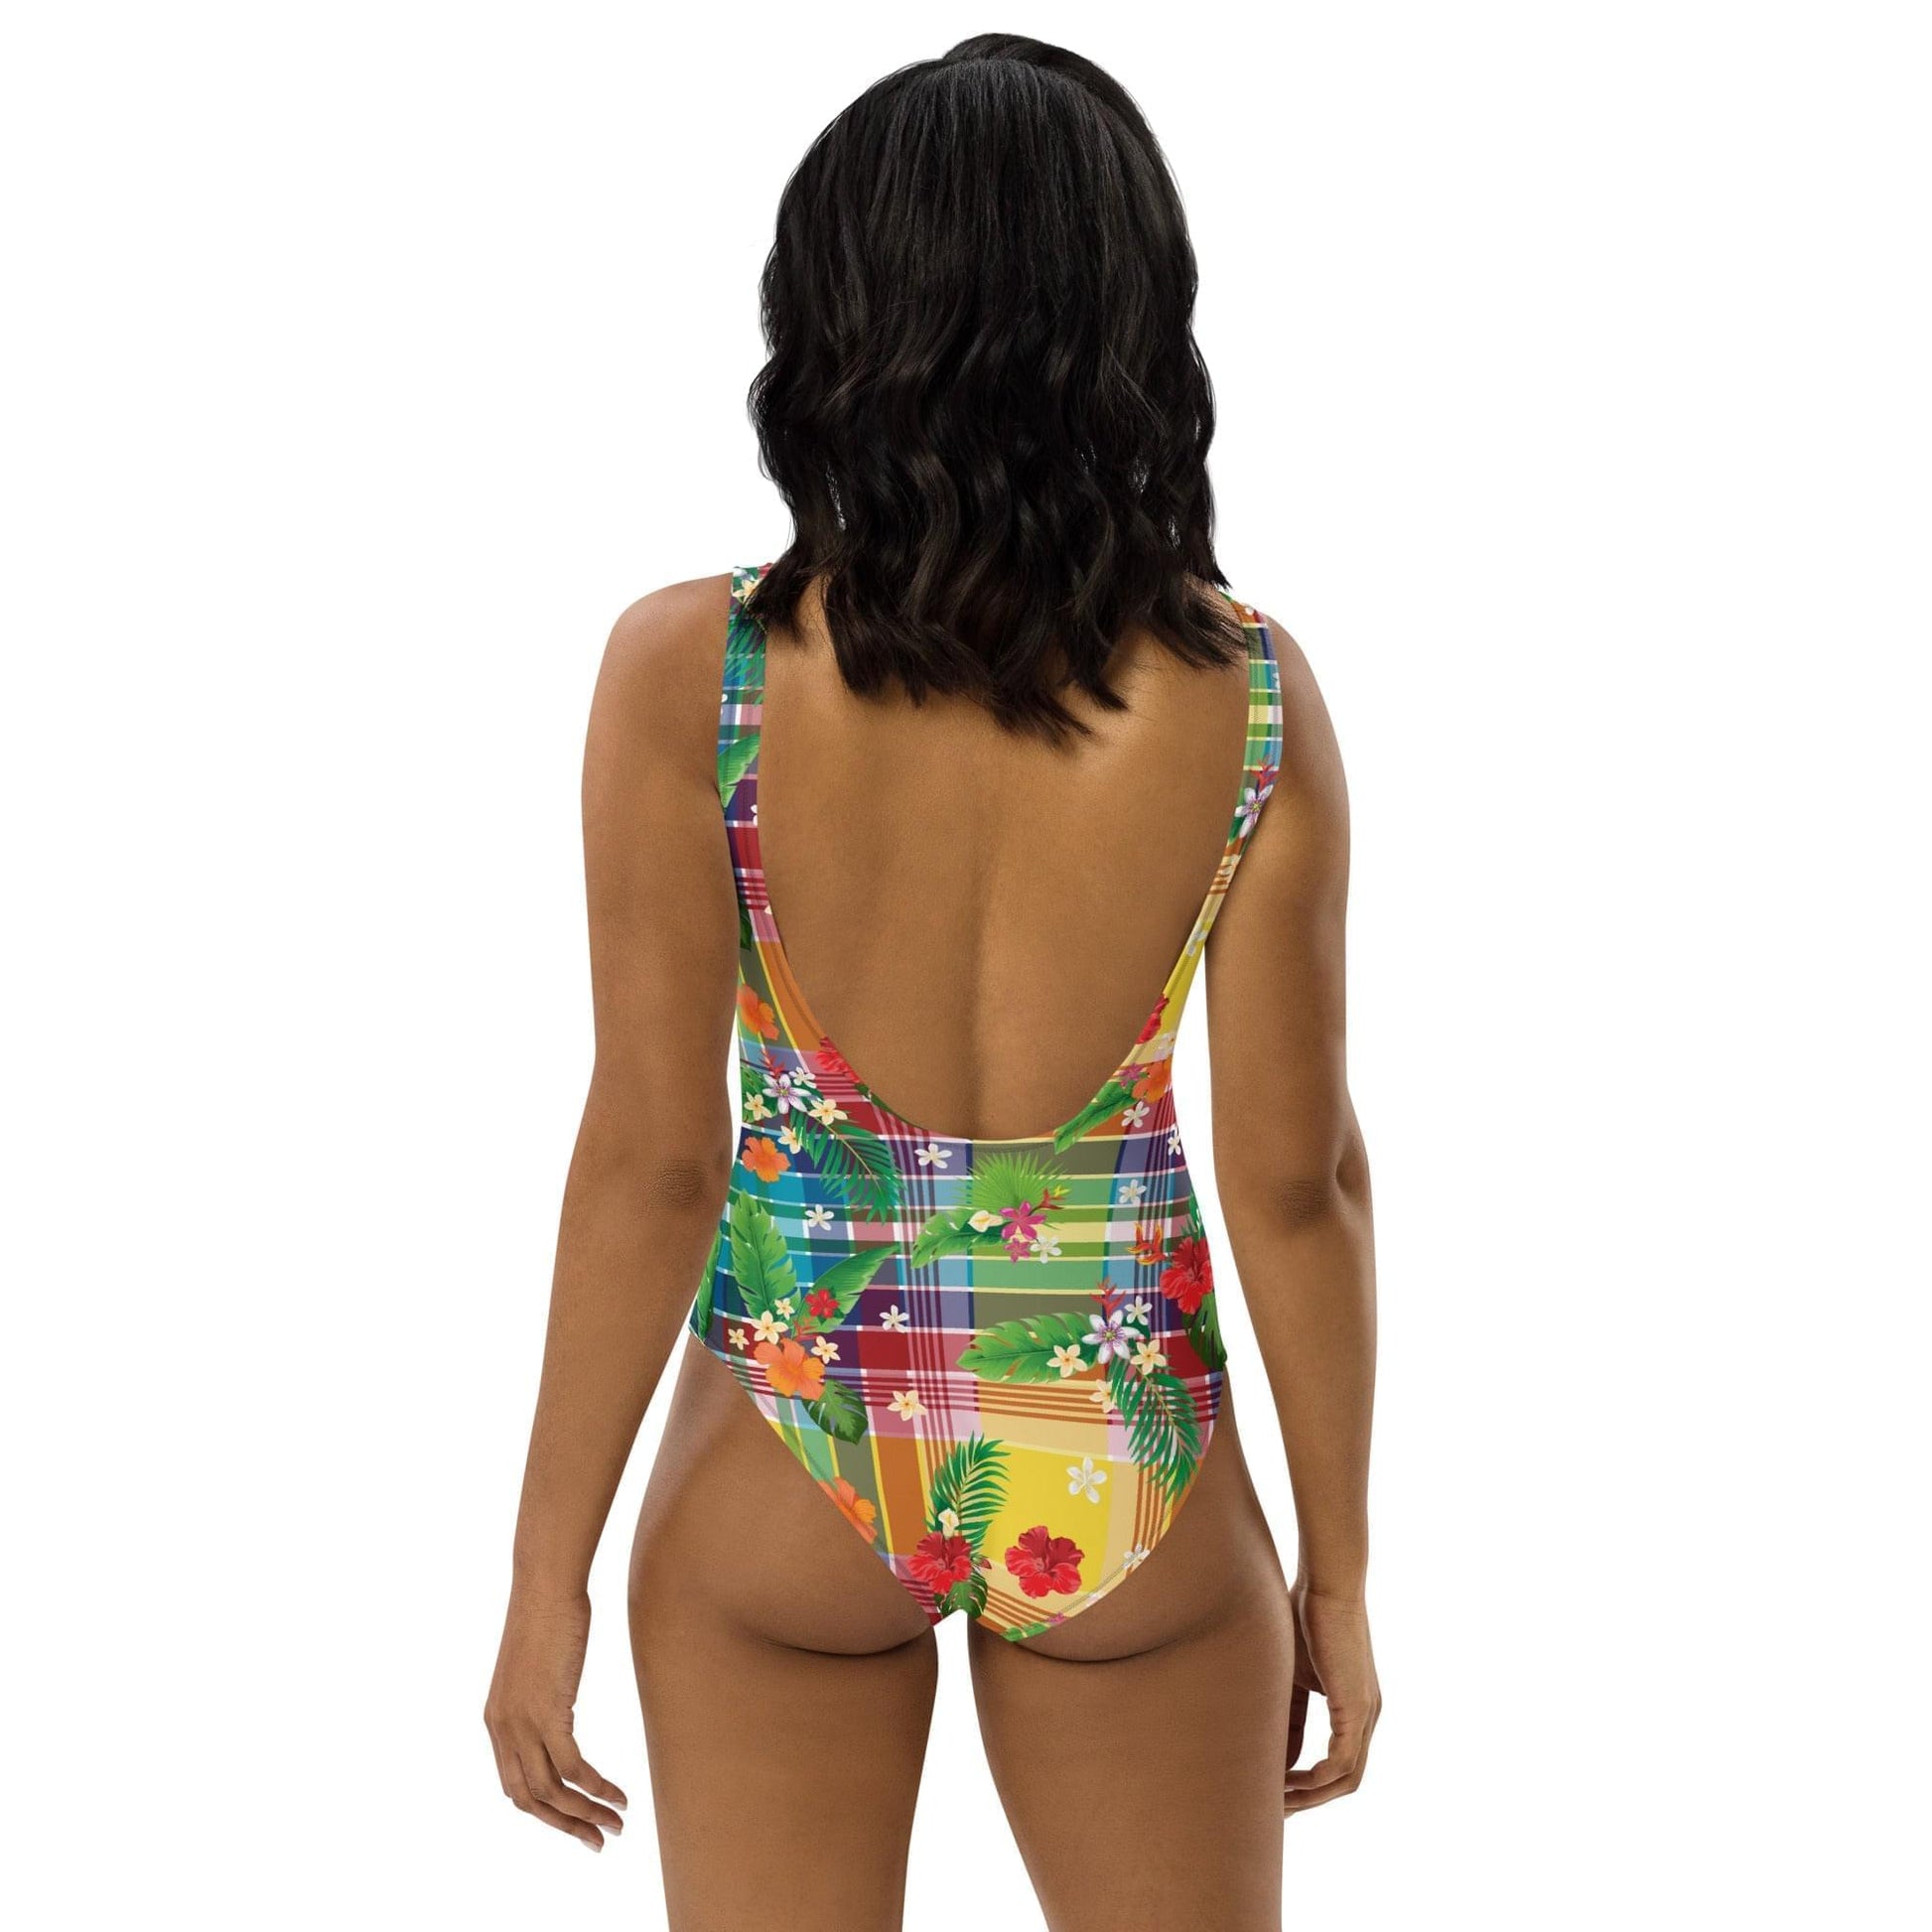 Floral Print One-Piece Swimsuit | Phade Fashion Virgin Islands